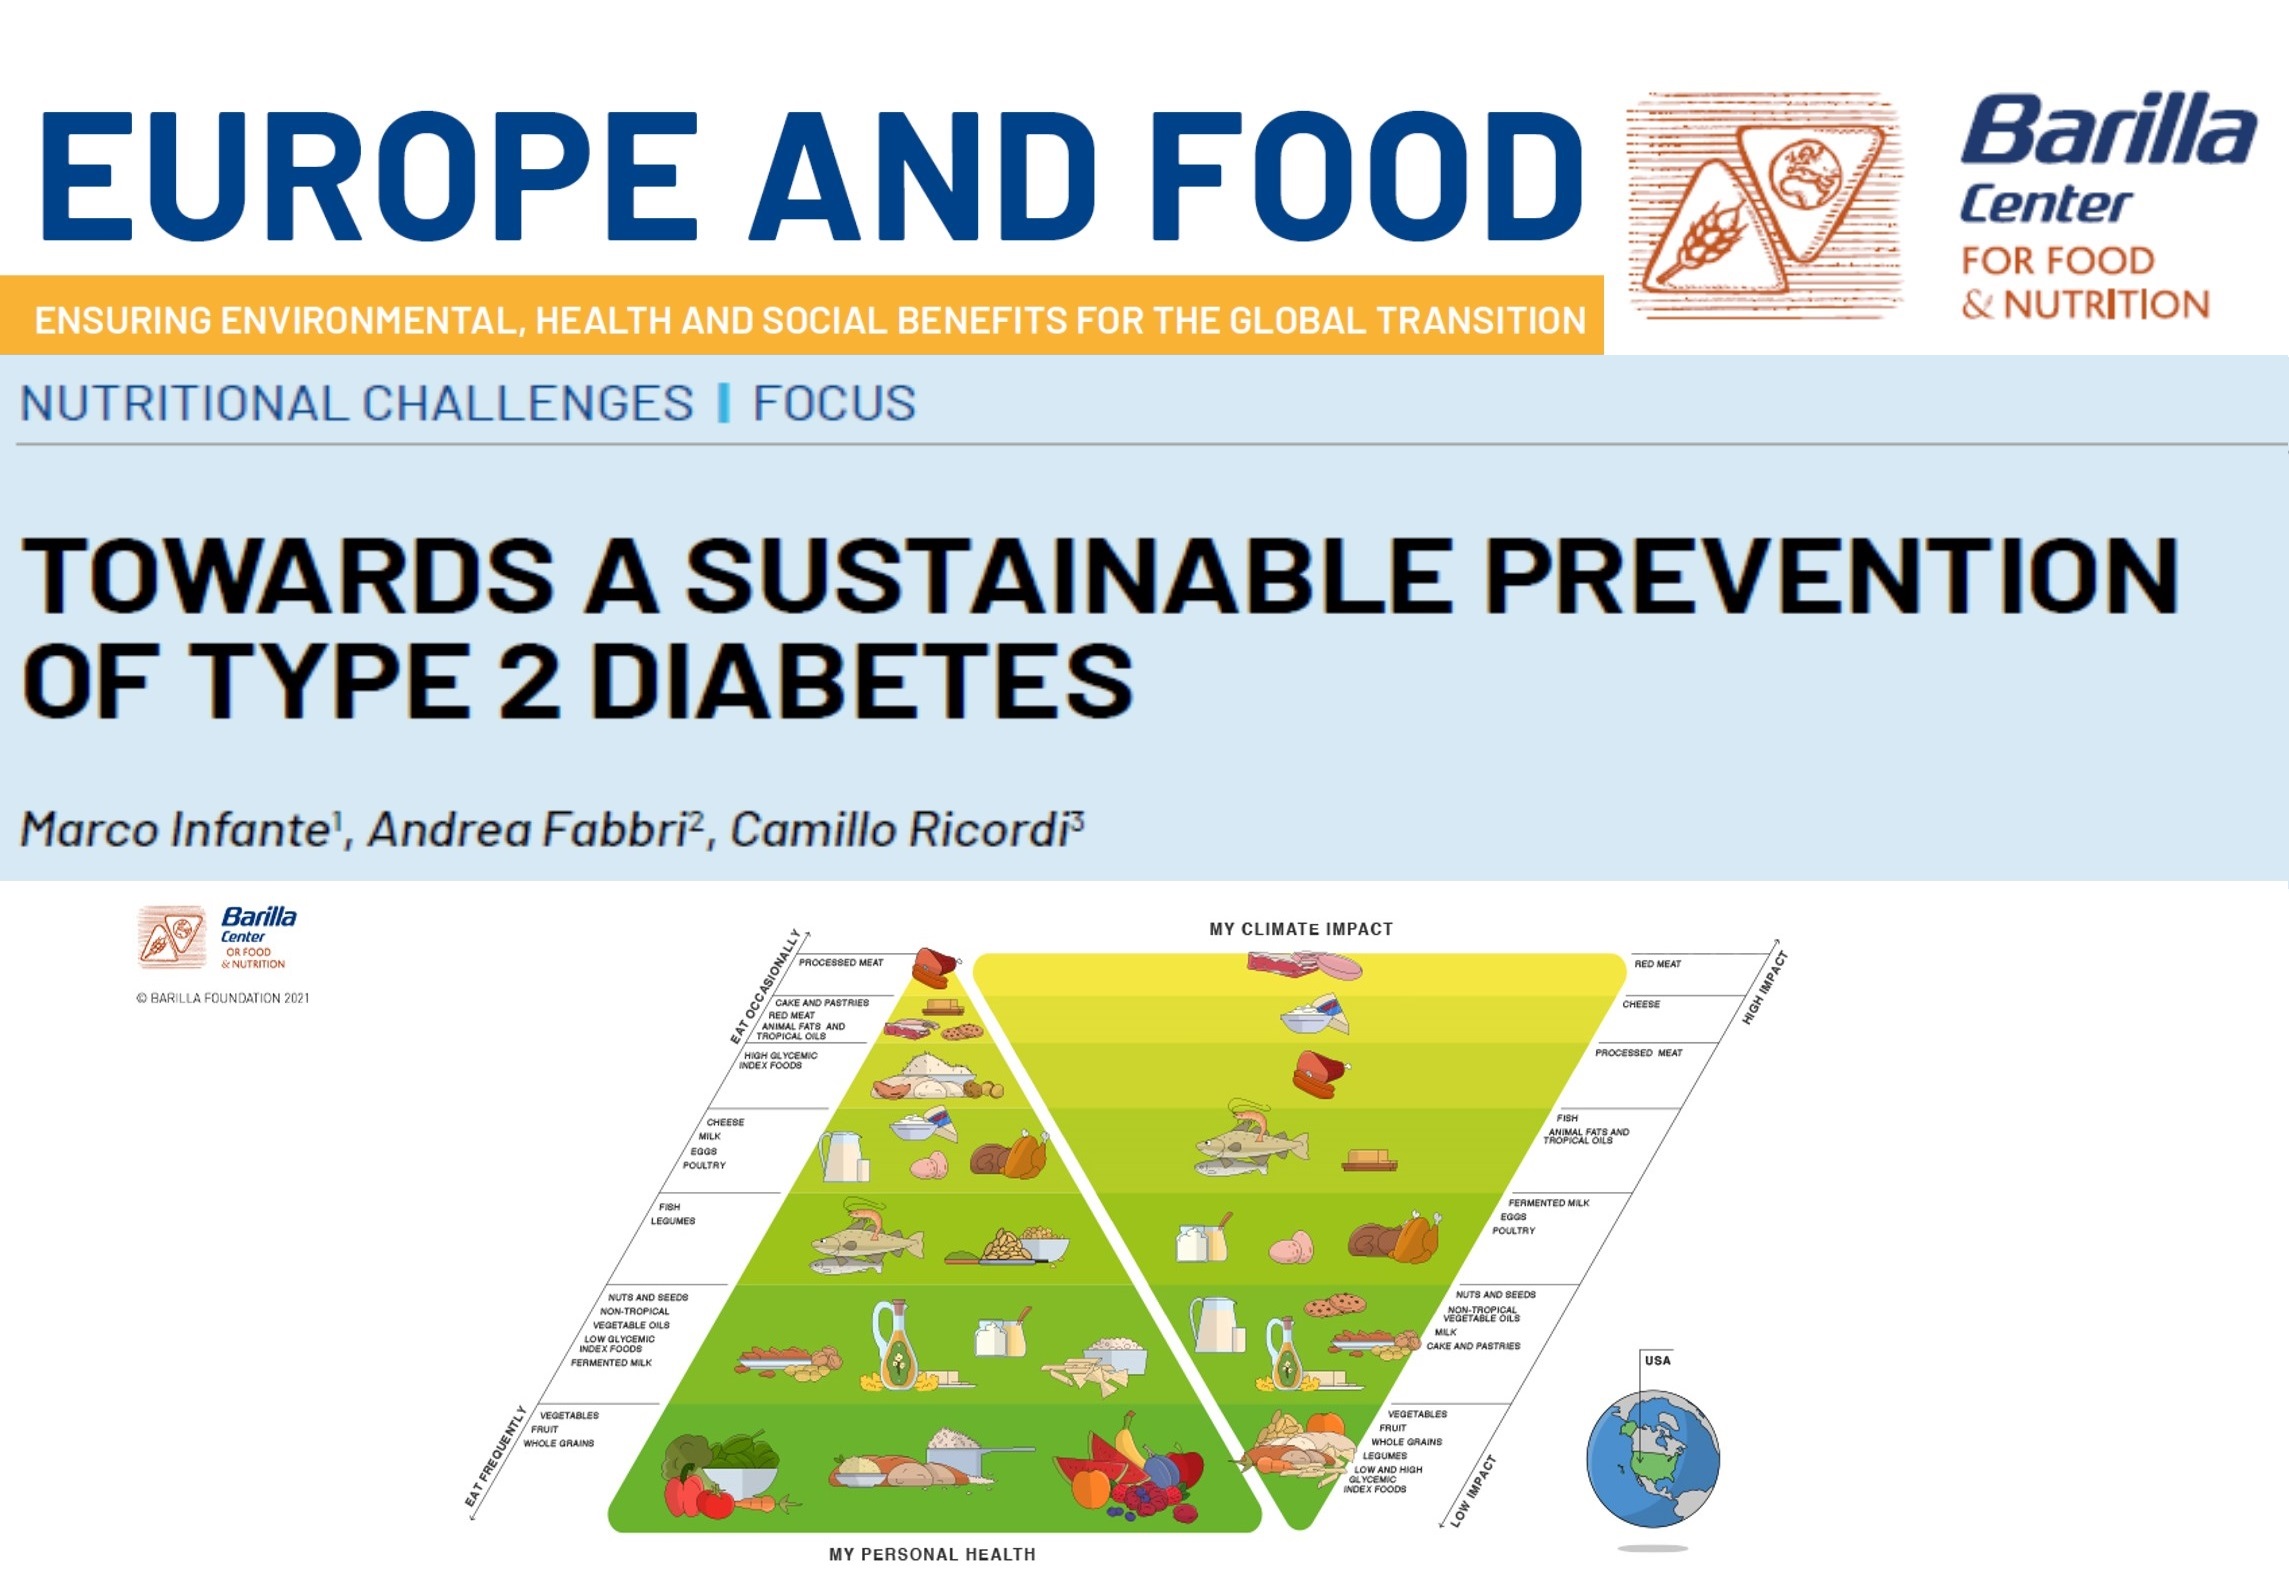 Dr. Infante’s contribution to the Europe And Food Report by The Barilla Center for Food & Nutrition 2021 – Towards a sustainable prevention of type 2 diabetes